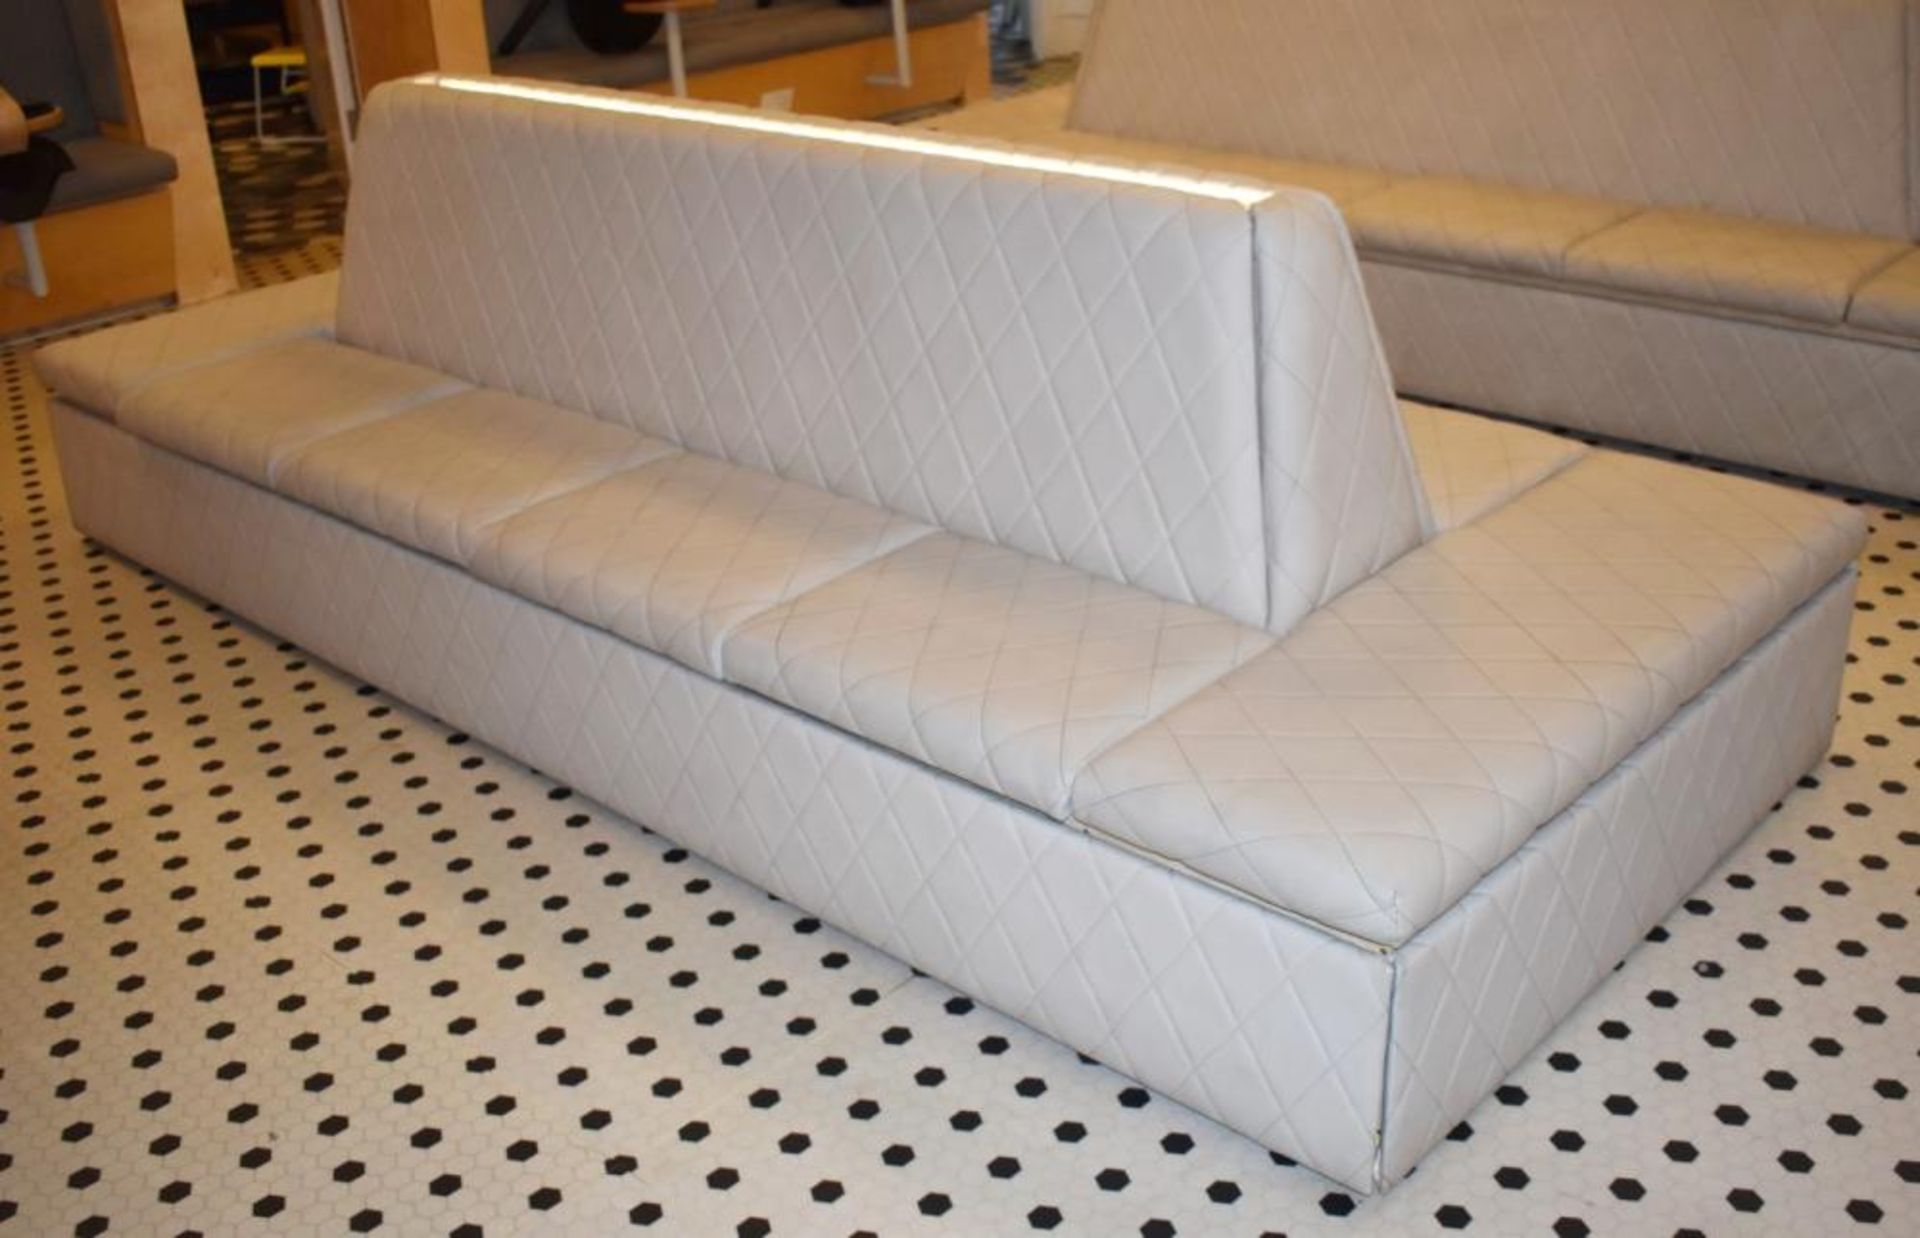 1 x Central Seating Banquette in a Contemporary Diamond Faux Grey Leather - Quality Build With Under - Image 9 of 9